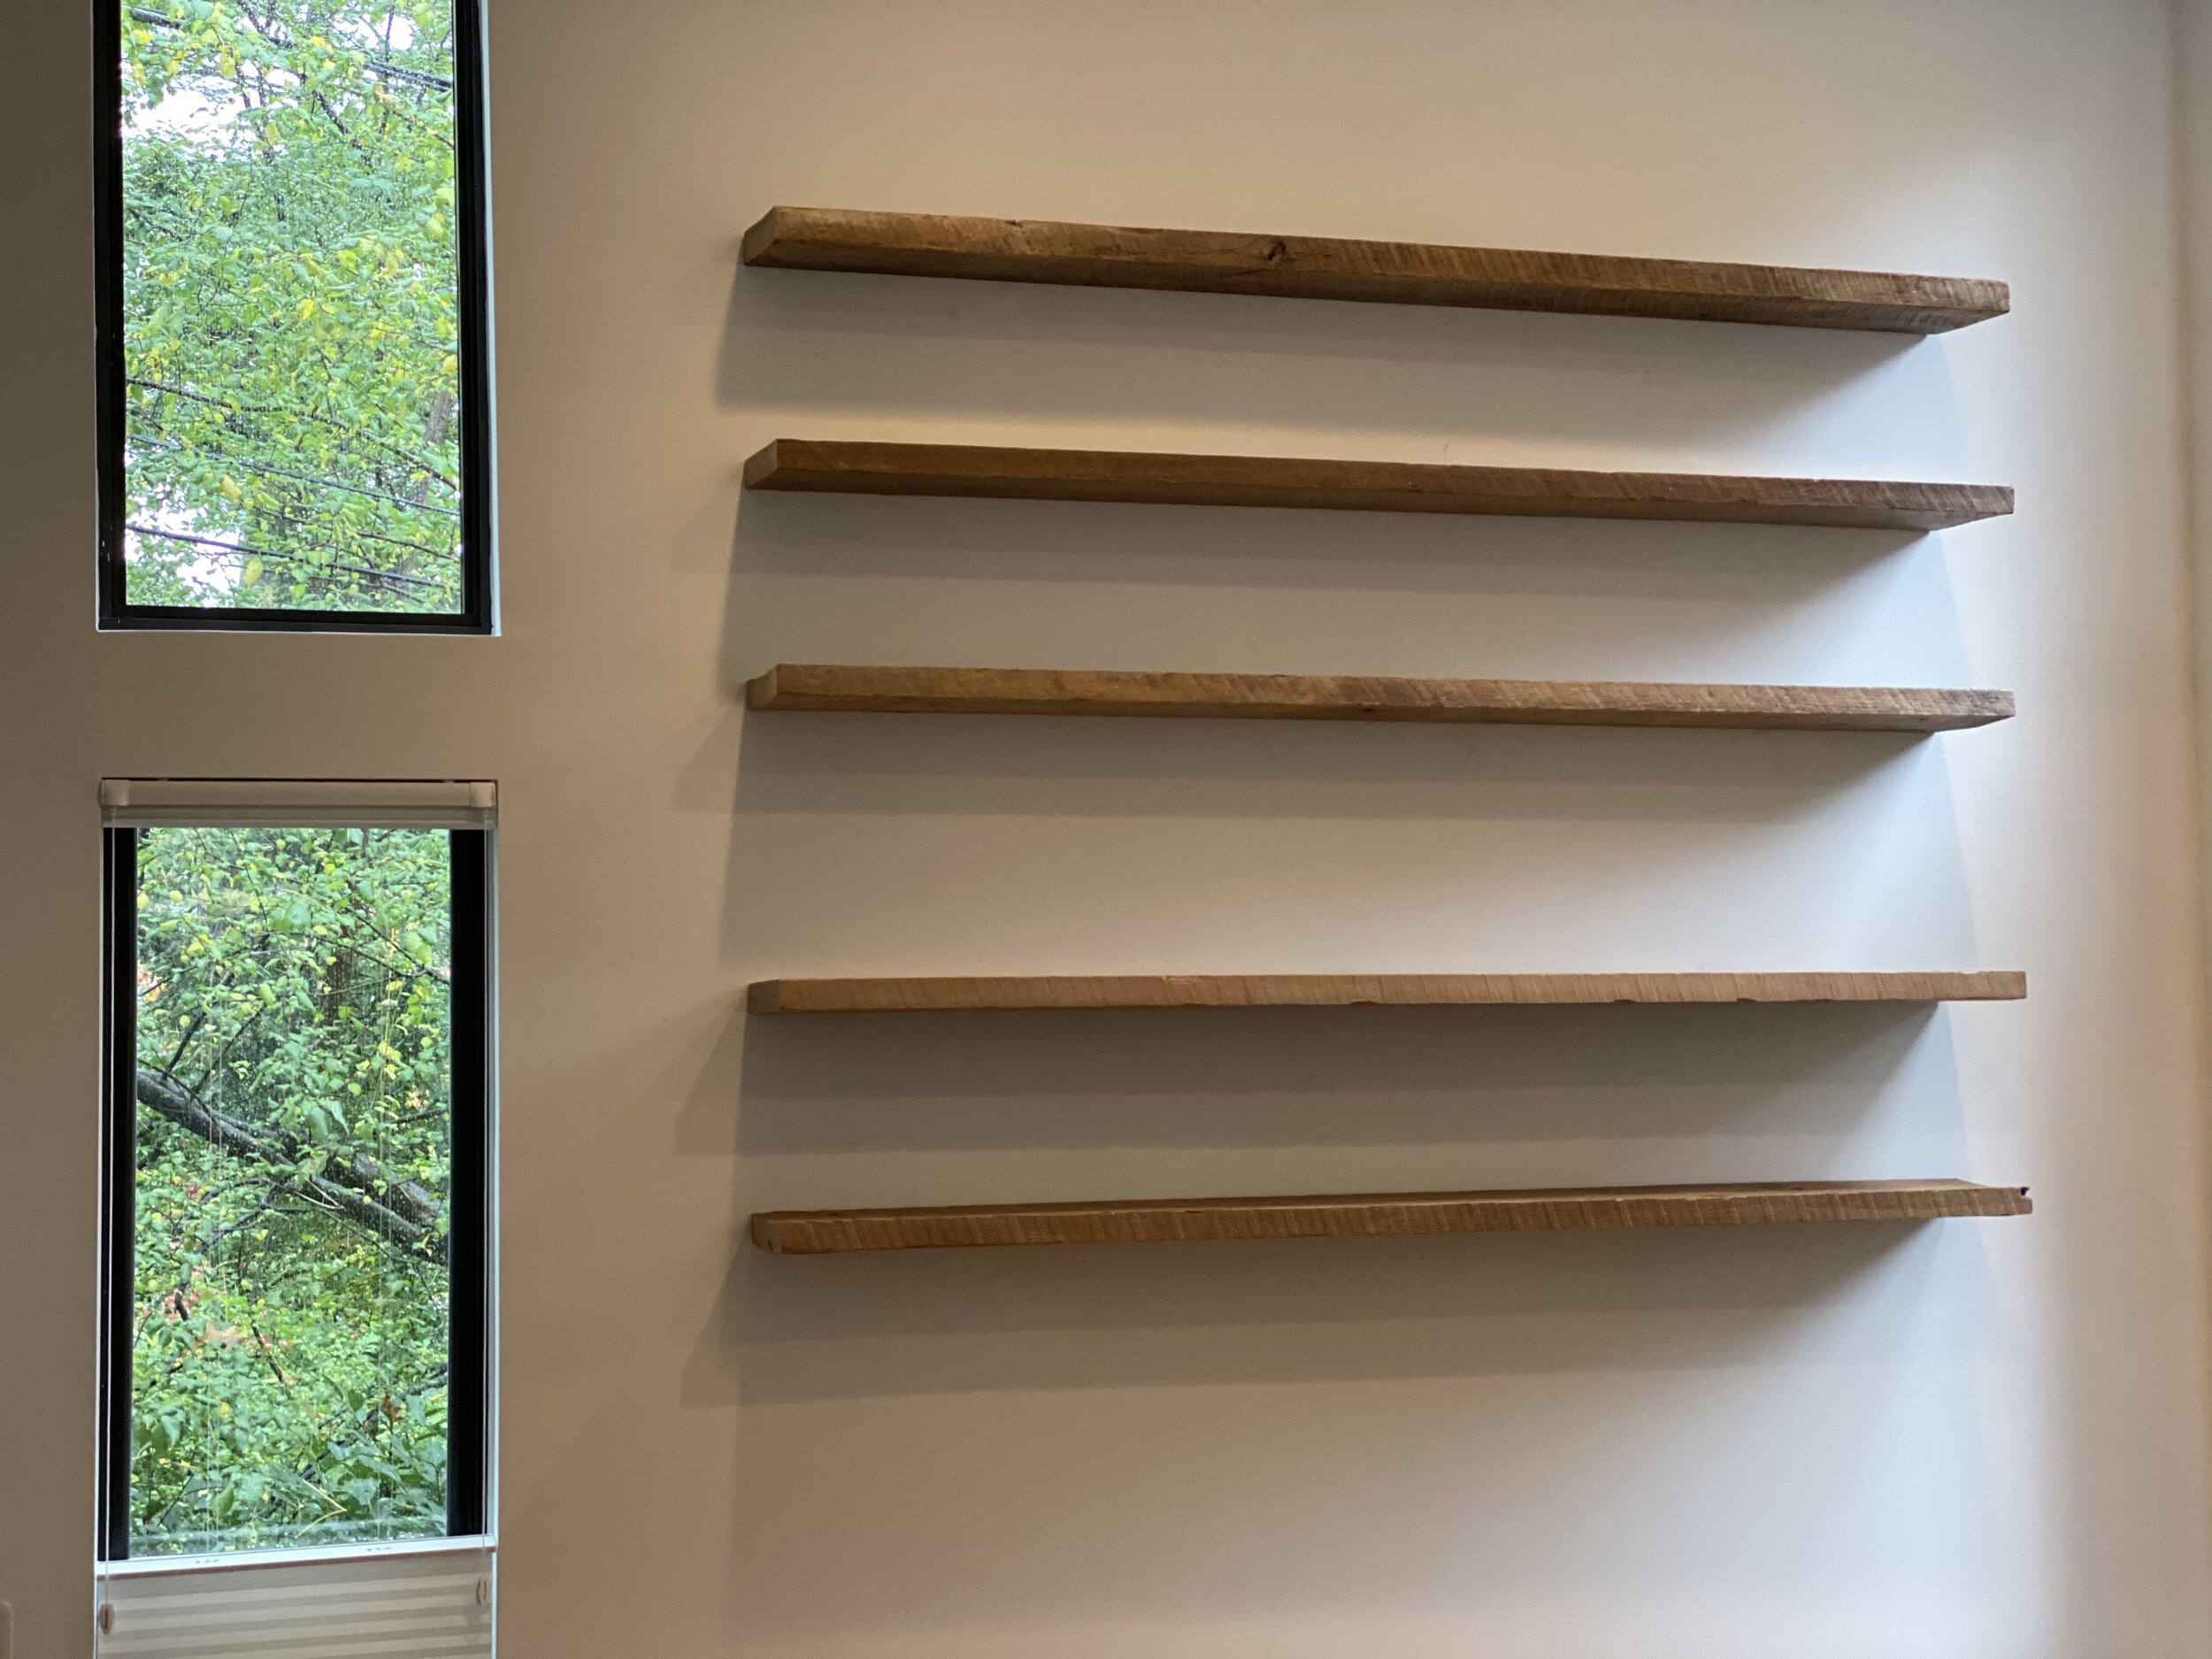 Why Solid Wood Floating Shelves, Are Floating Shelves Any Good